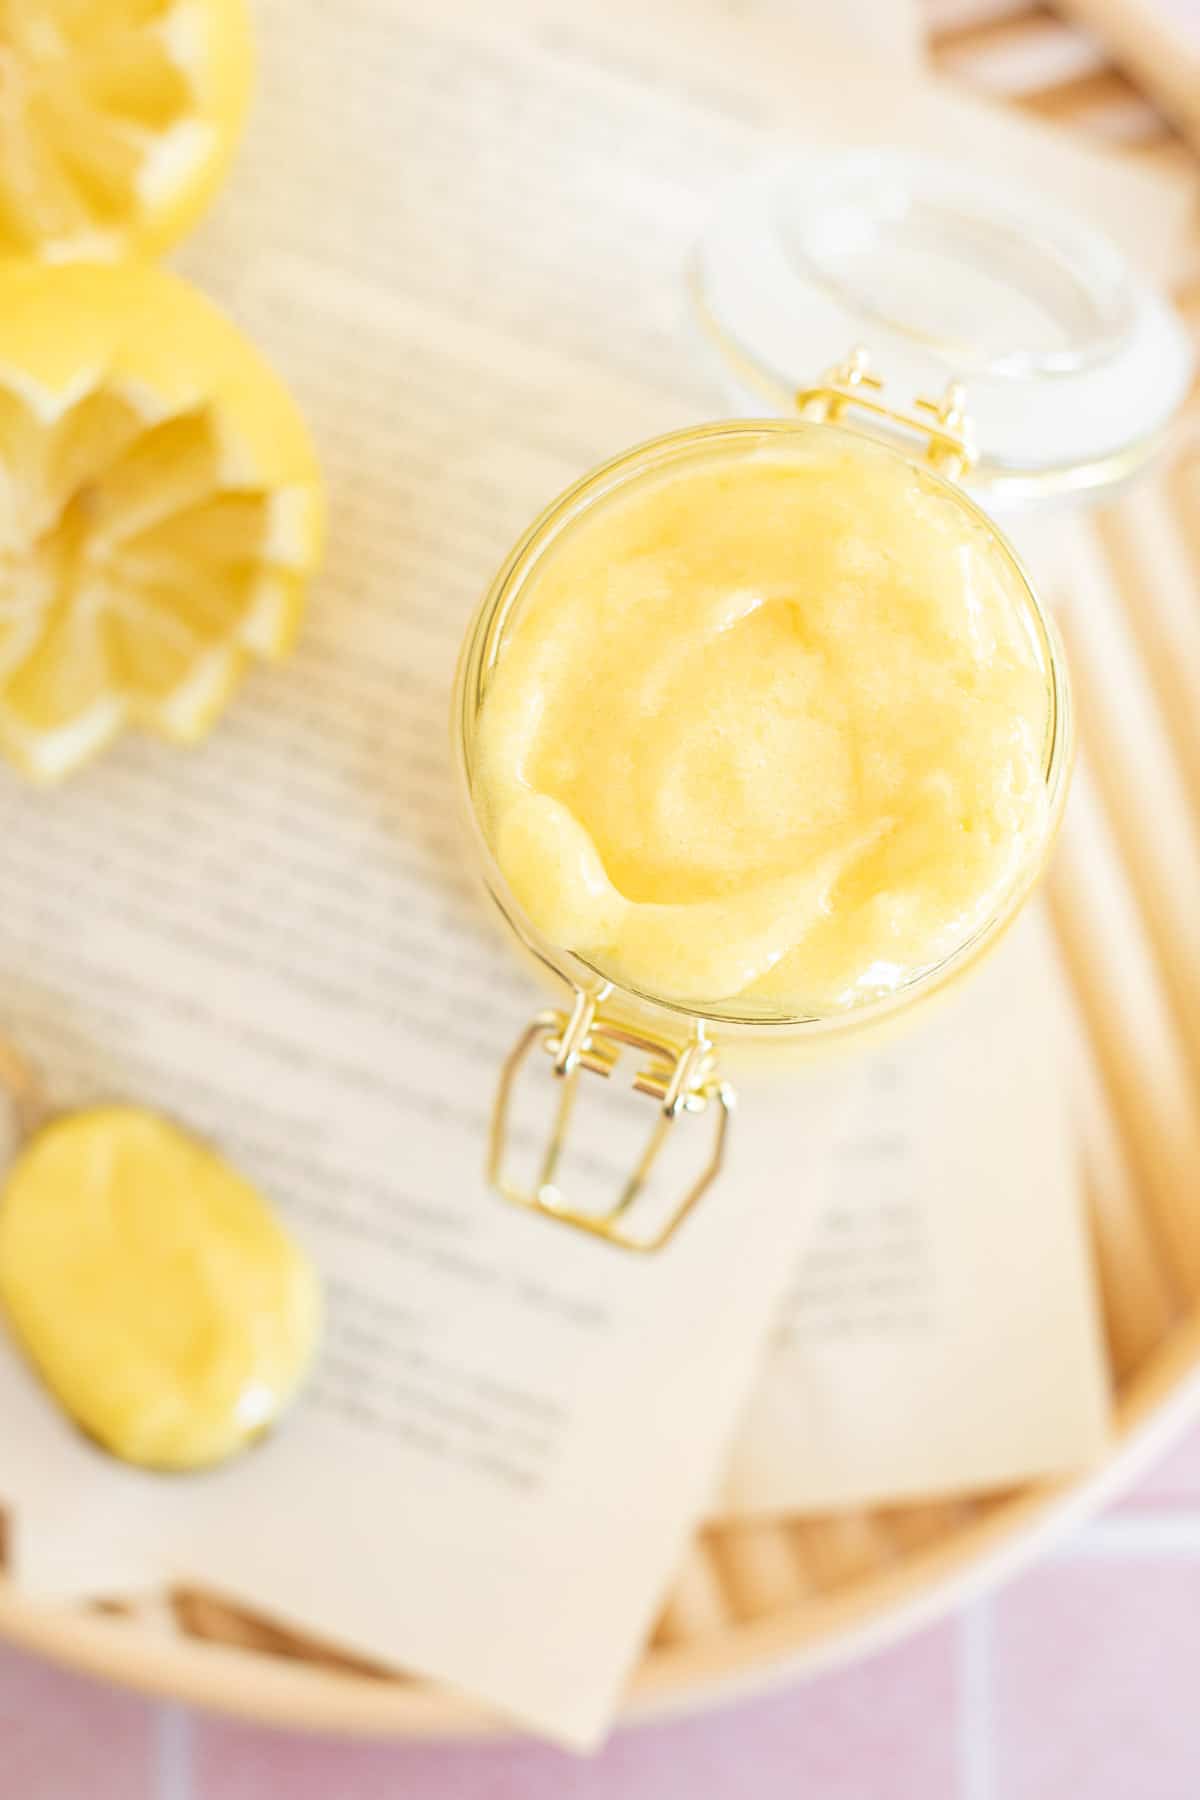 a small glass jar of yellow lemon curd on a wooden serving tray.